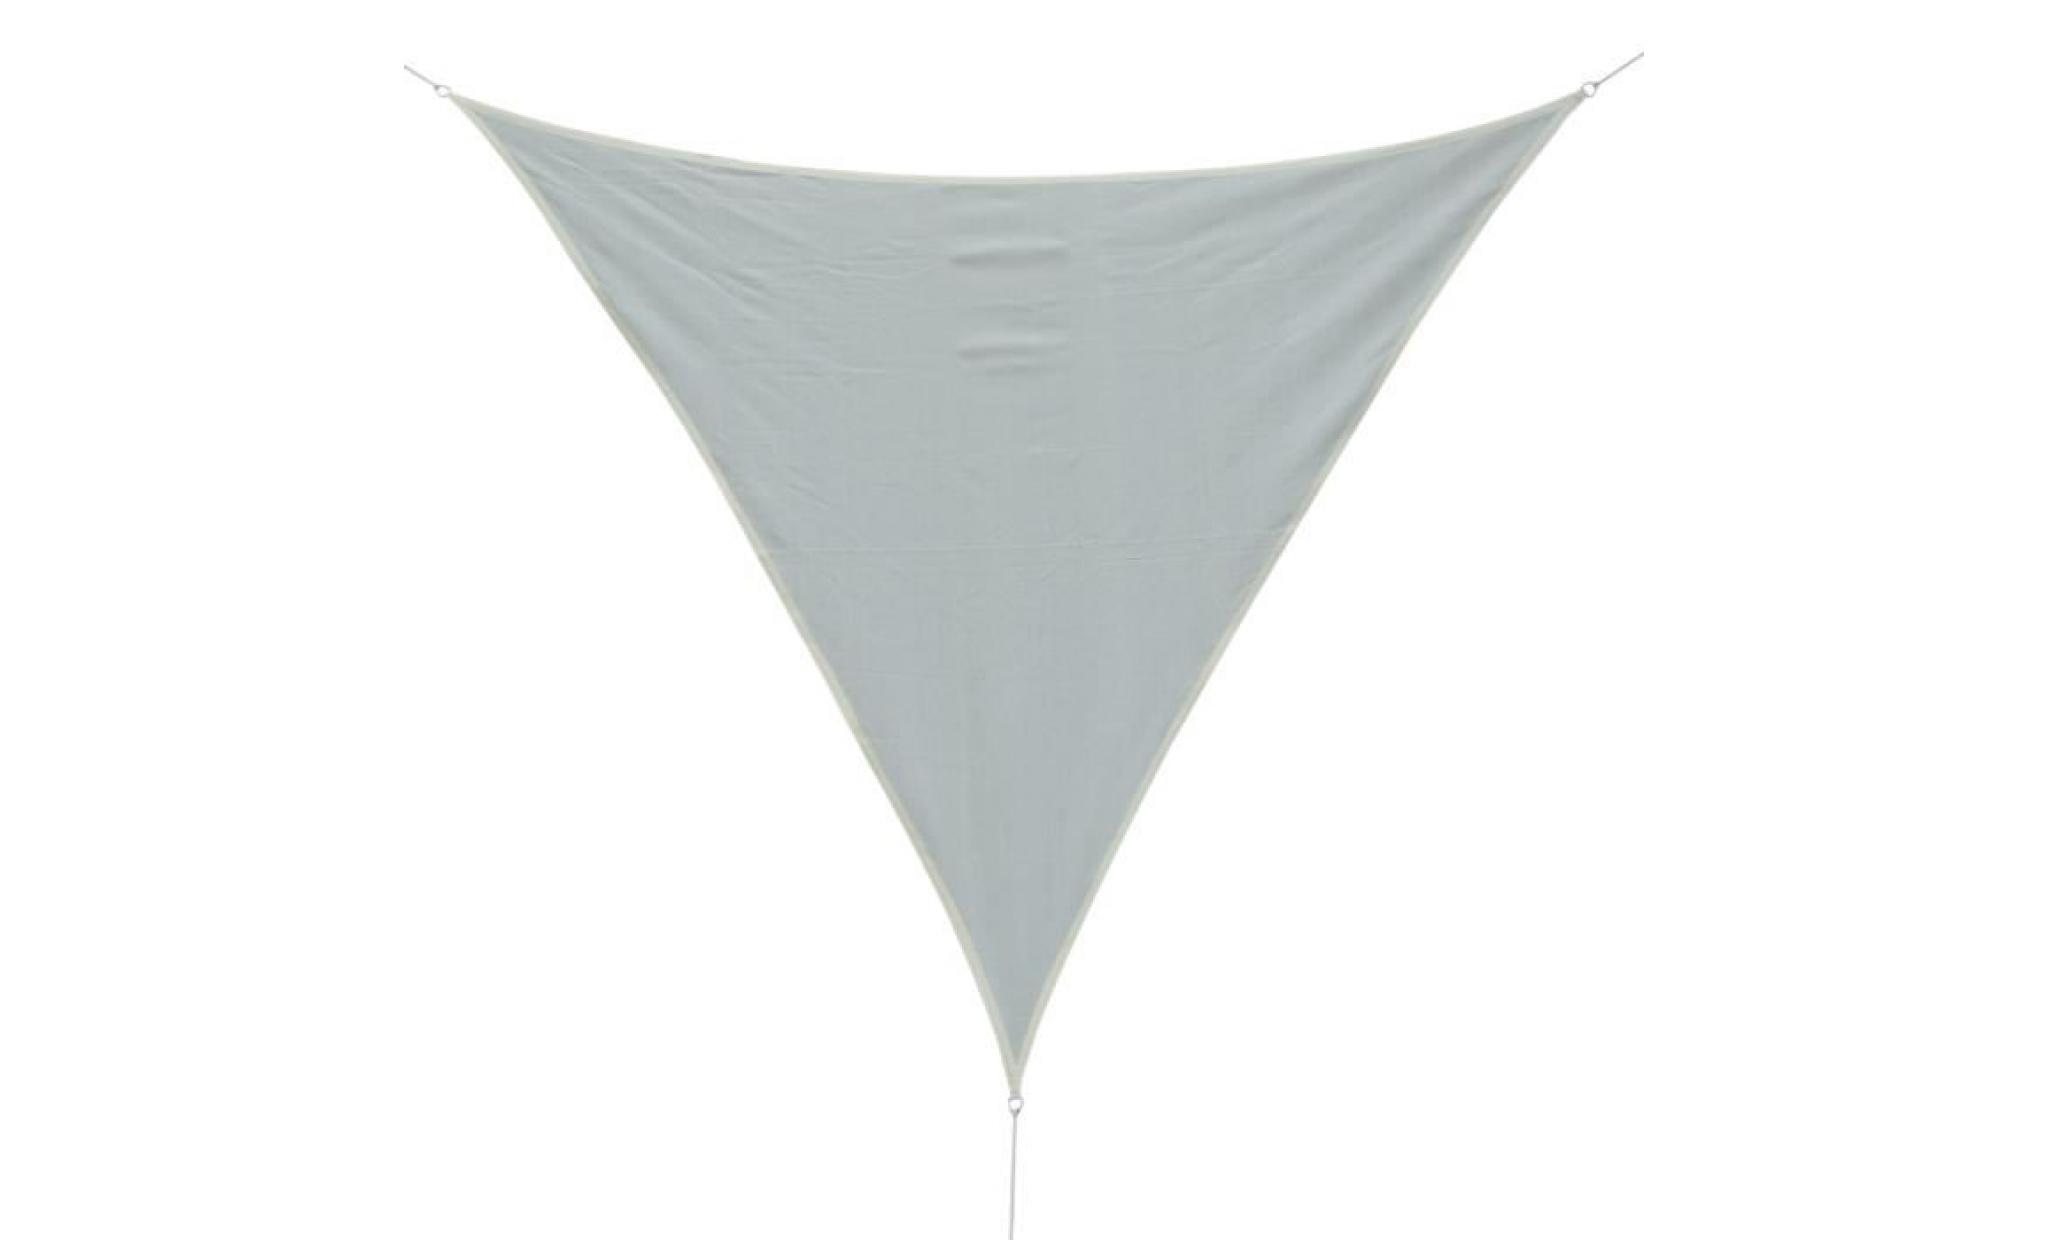 voile d'ombrage triangulaire grande taille 3 x 3 x 3 m hdpe blanc 300x300x1cm blanc